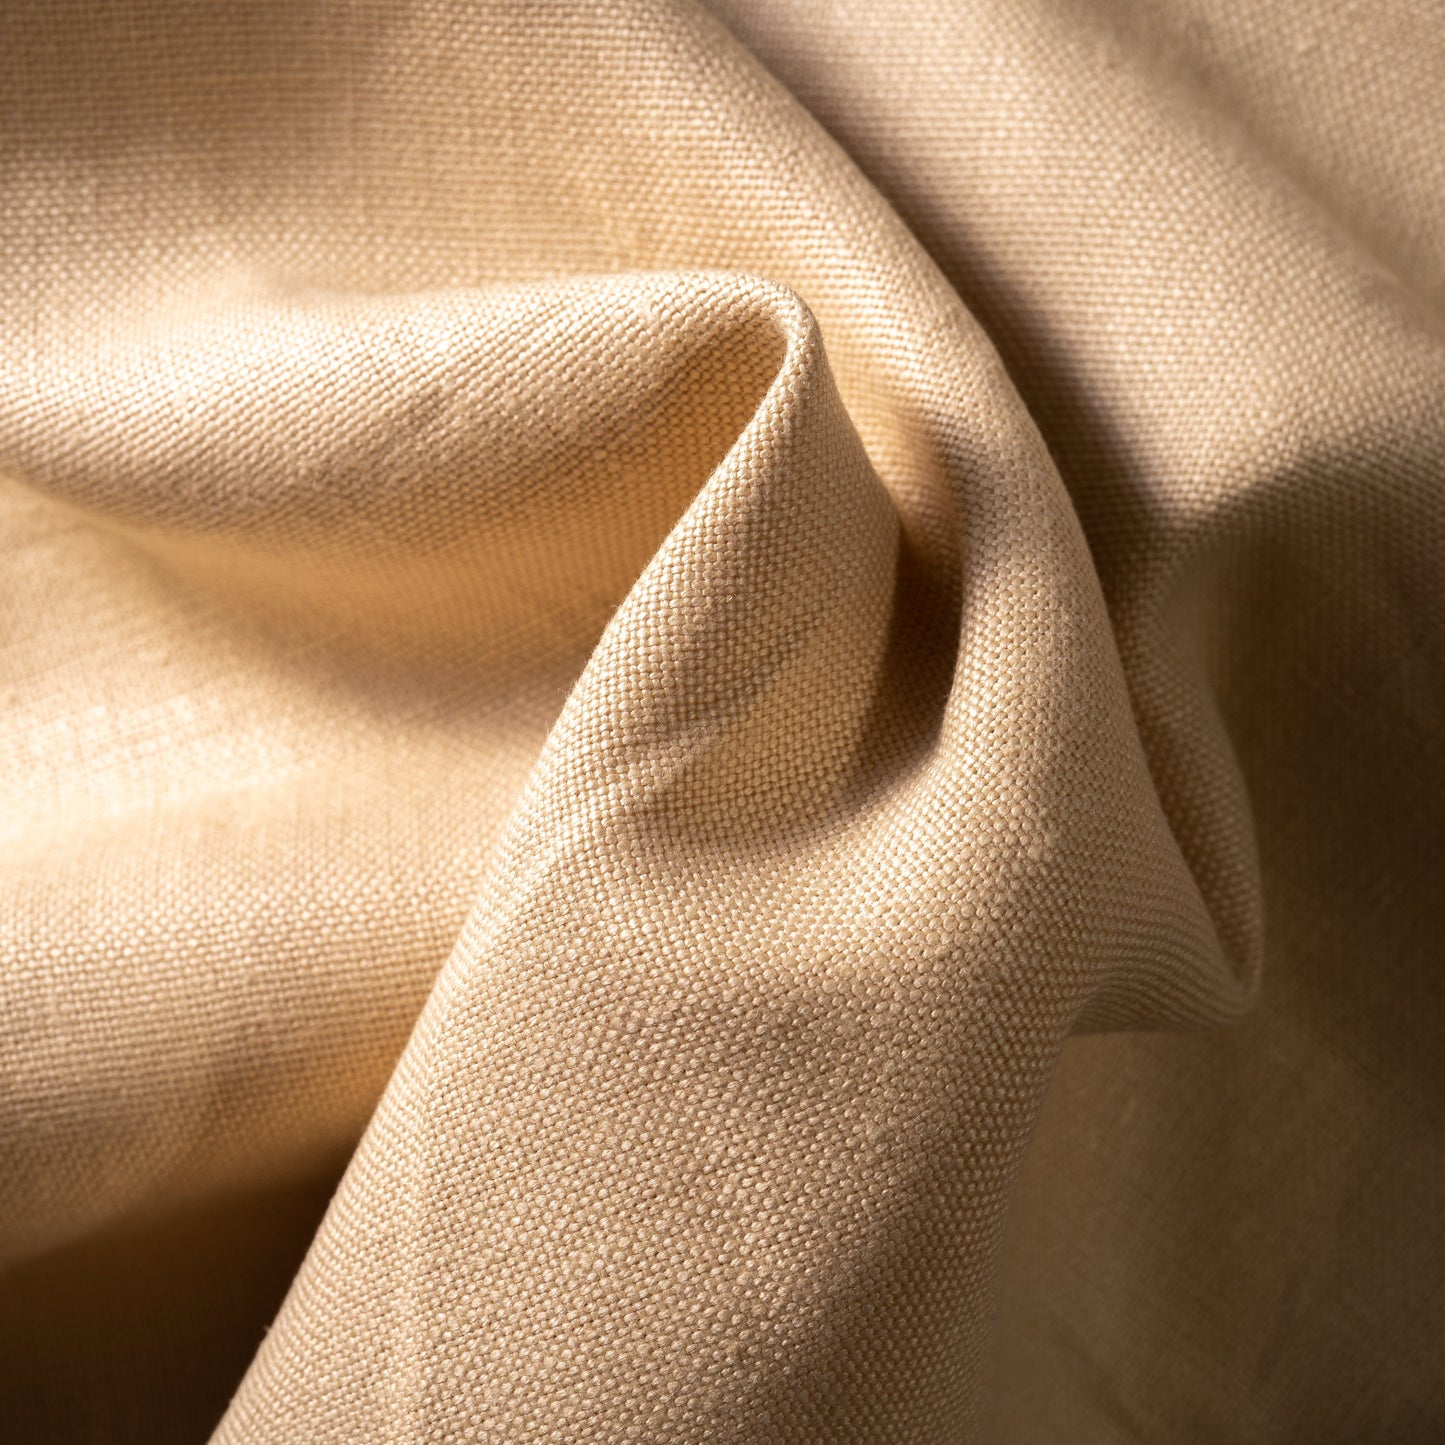 12 oz/sq yard 100% Upholstery/ Slipcover Weight Linen in Cashew Swatch